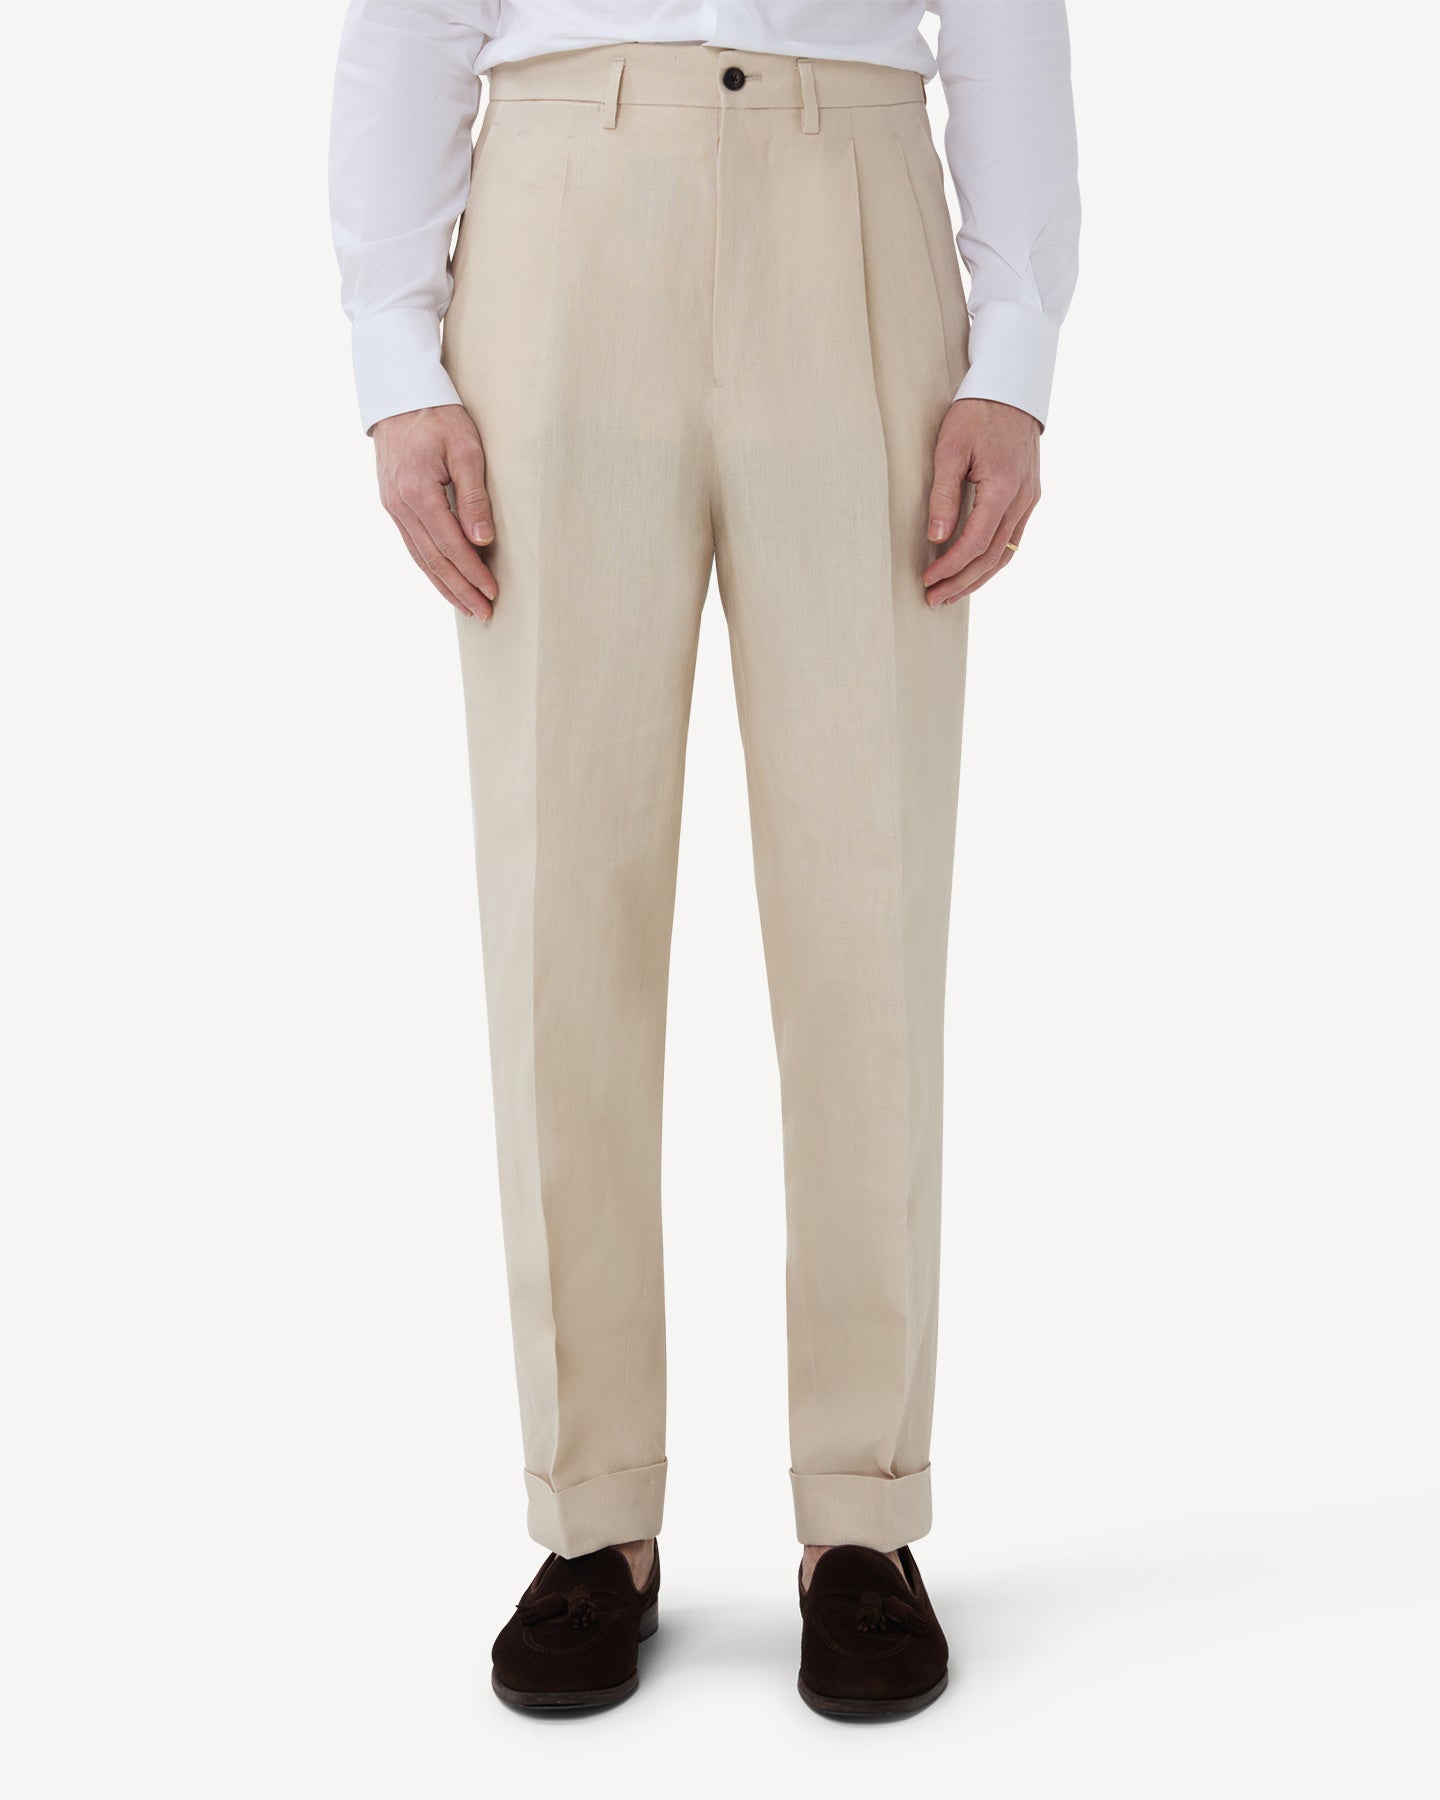 The front of stone linen trousers with double pleats and belt loops